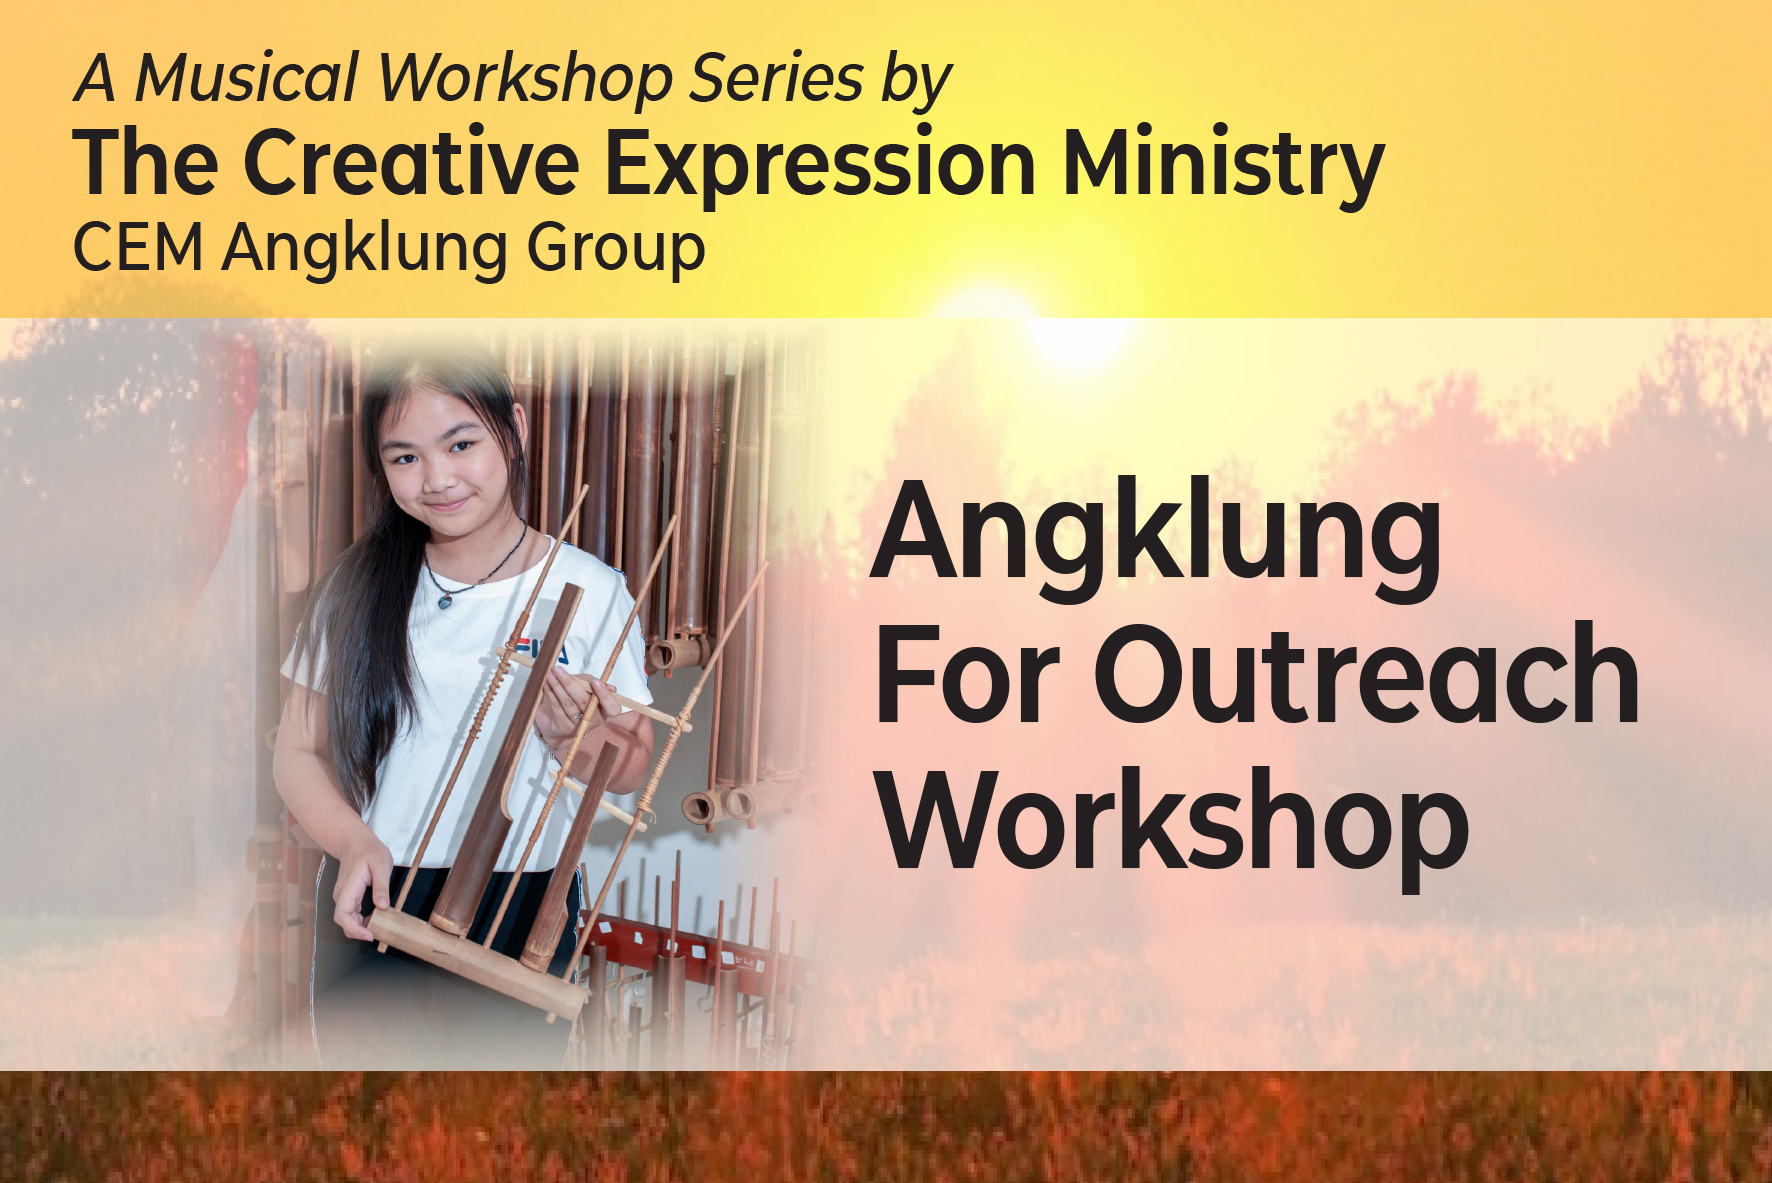 Angklung For Outreach Workshop